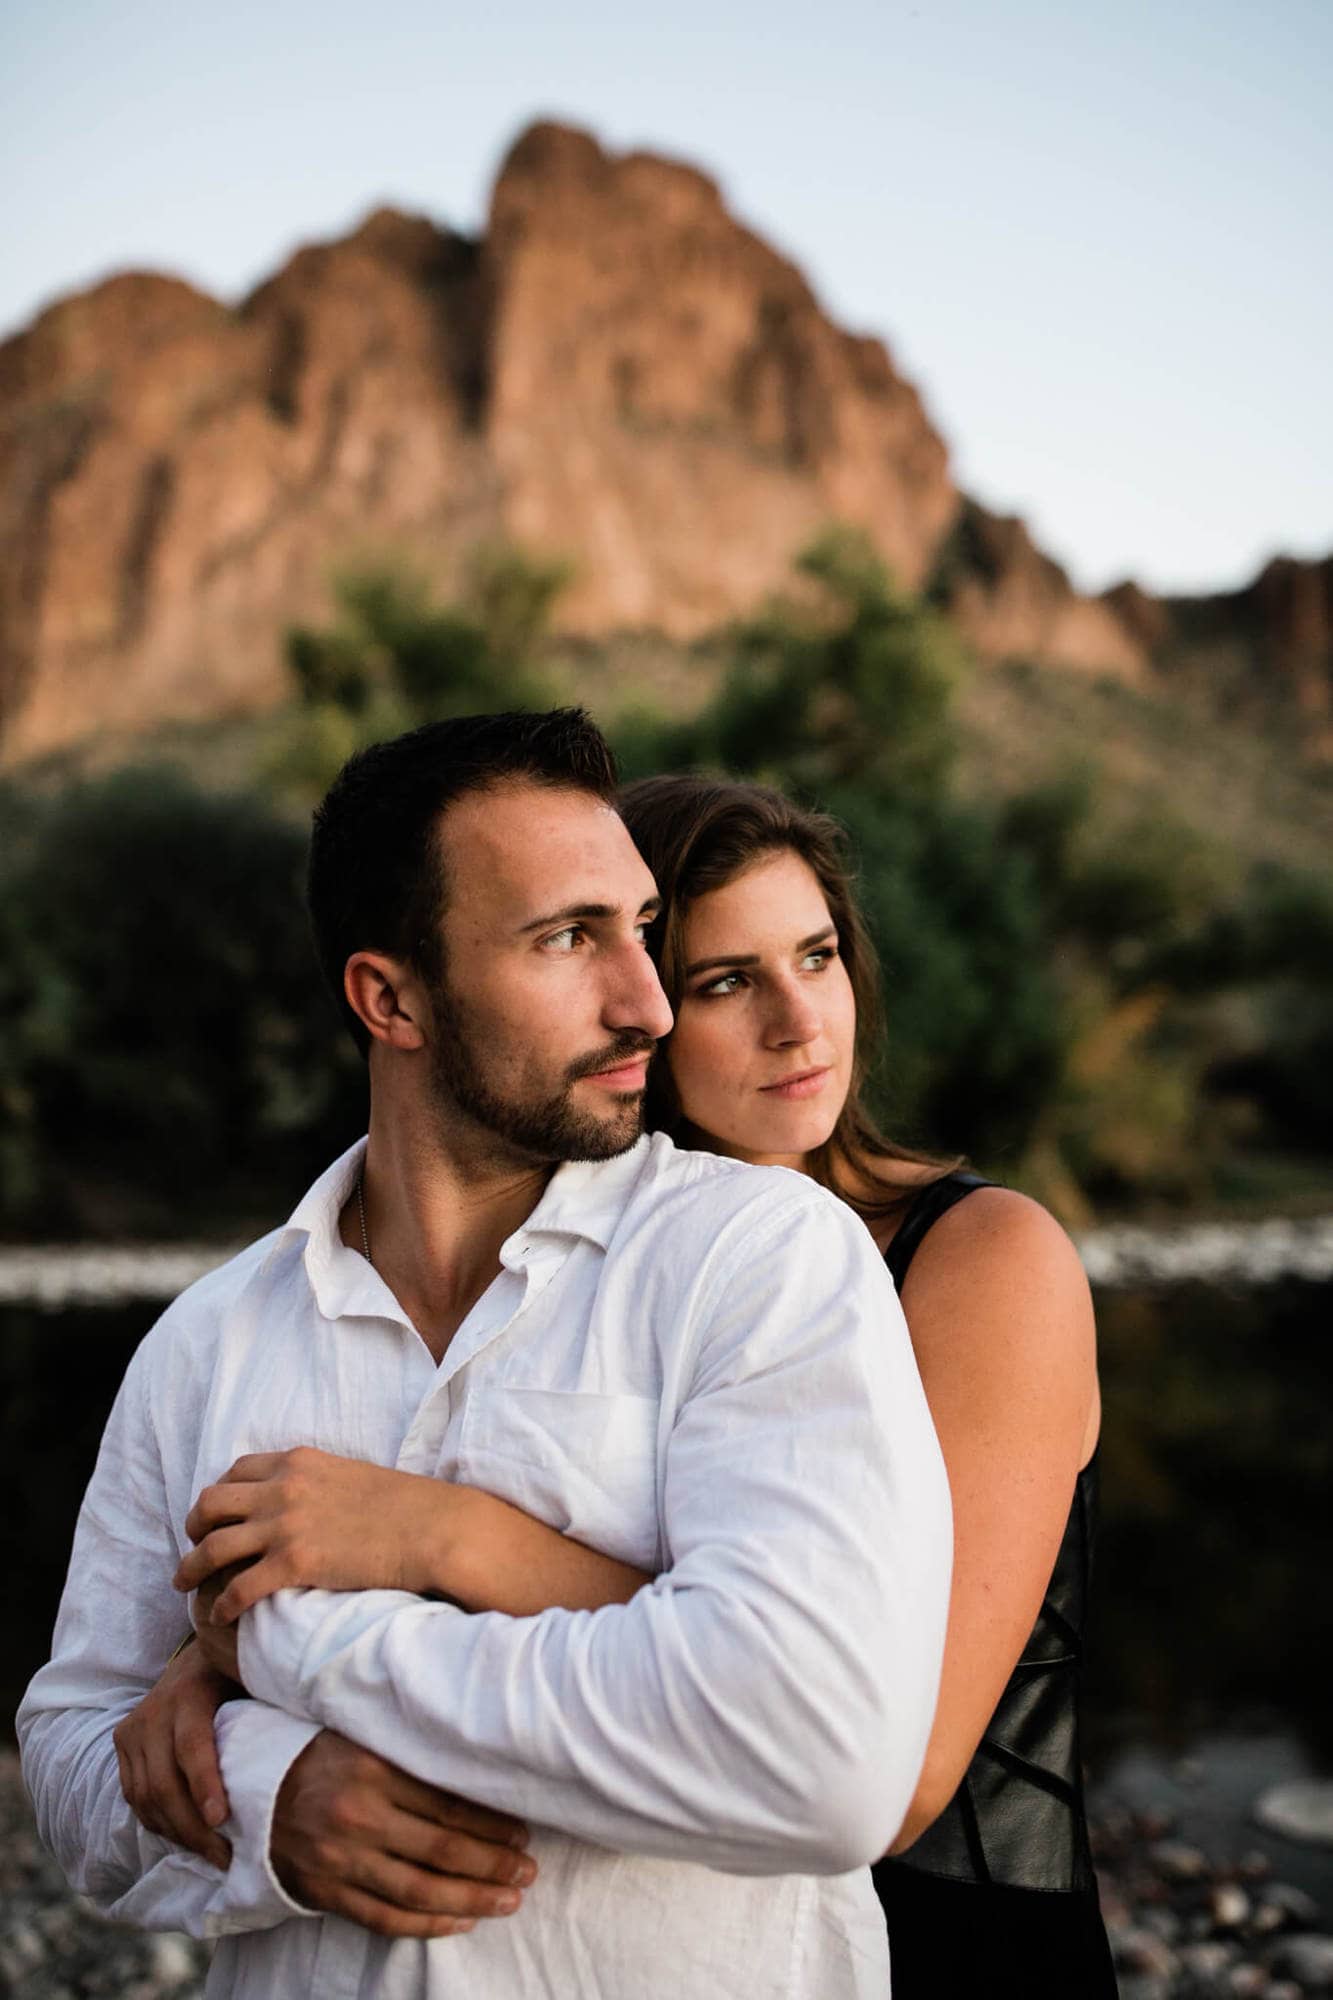 The couple walks along the Salt River during their desert engagement session.